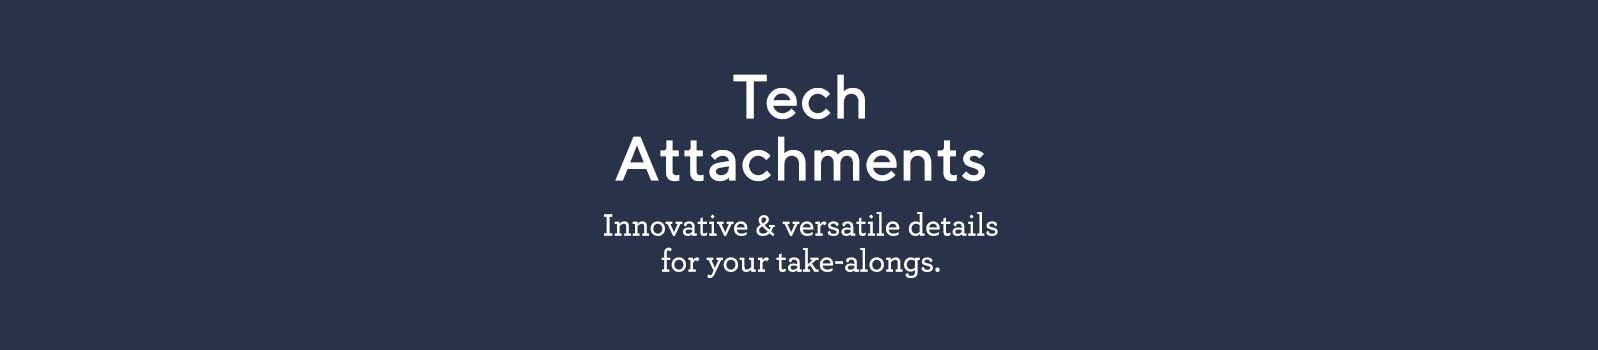 Tech Attachments: Innovative & versatile details for your take-alongs.